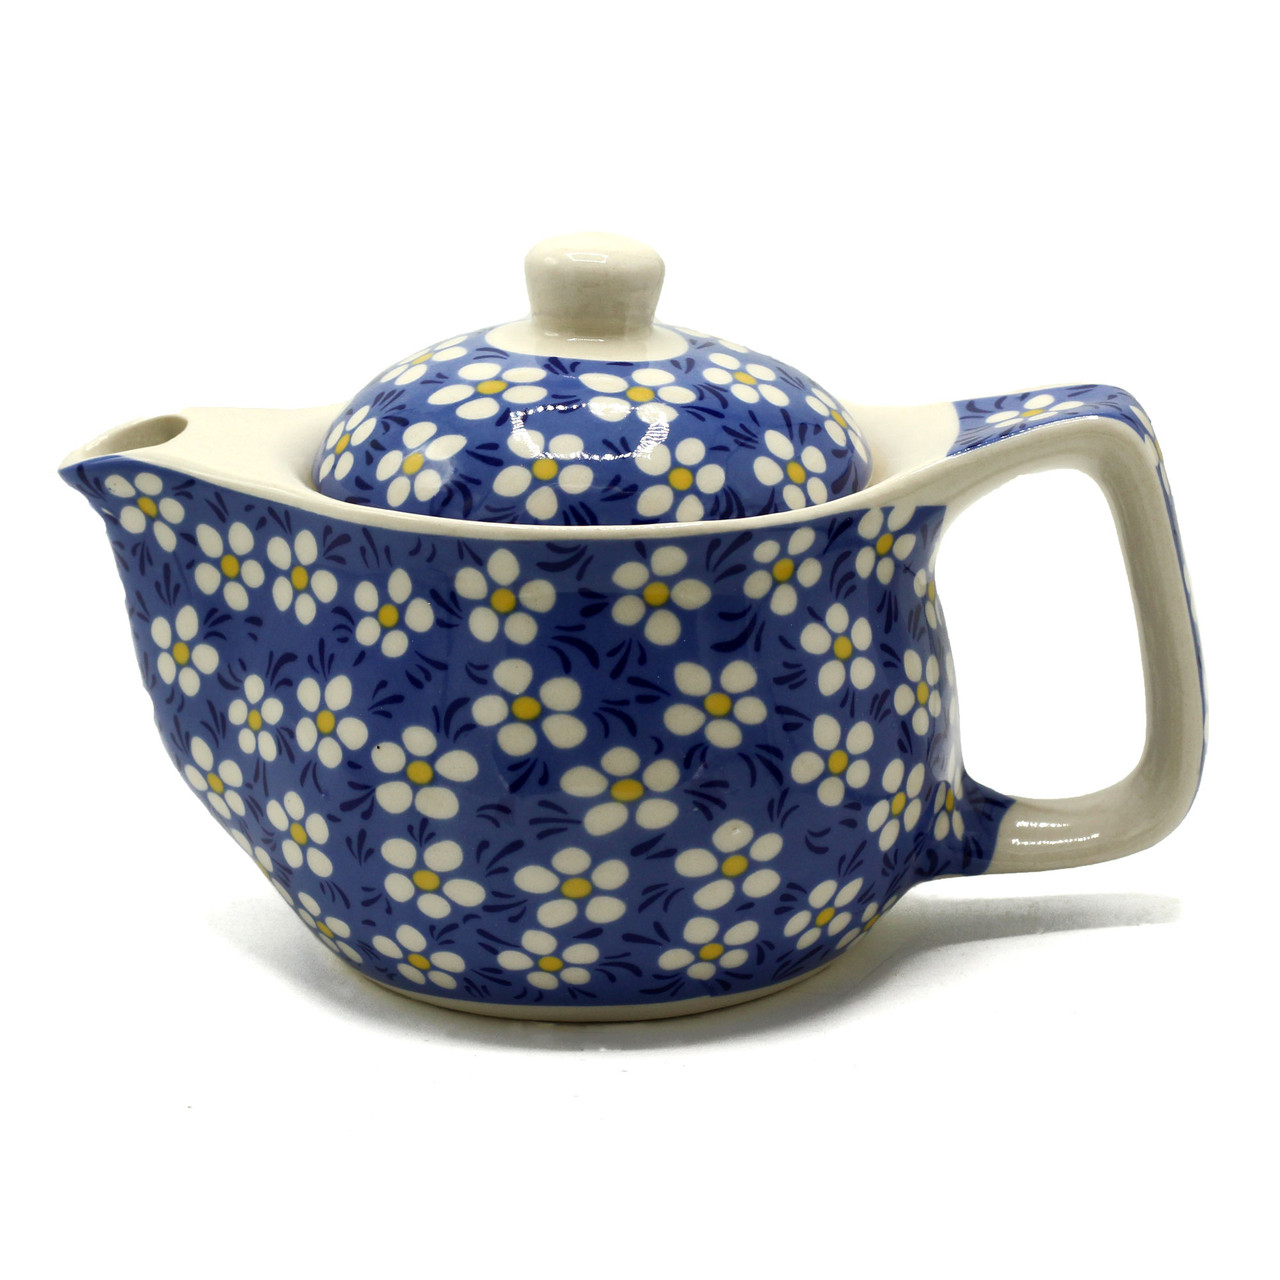 Small Teapot with a Blue Daisy Design